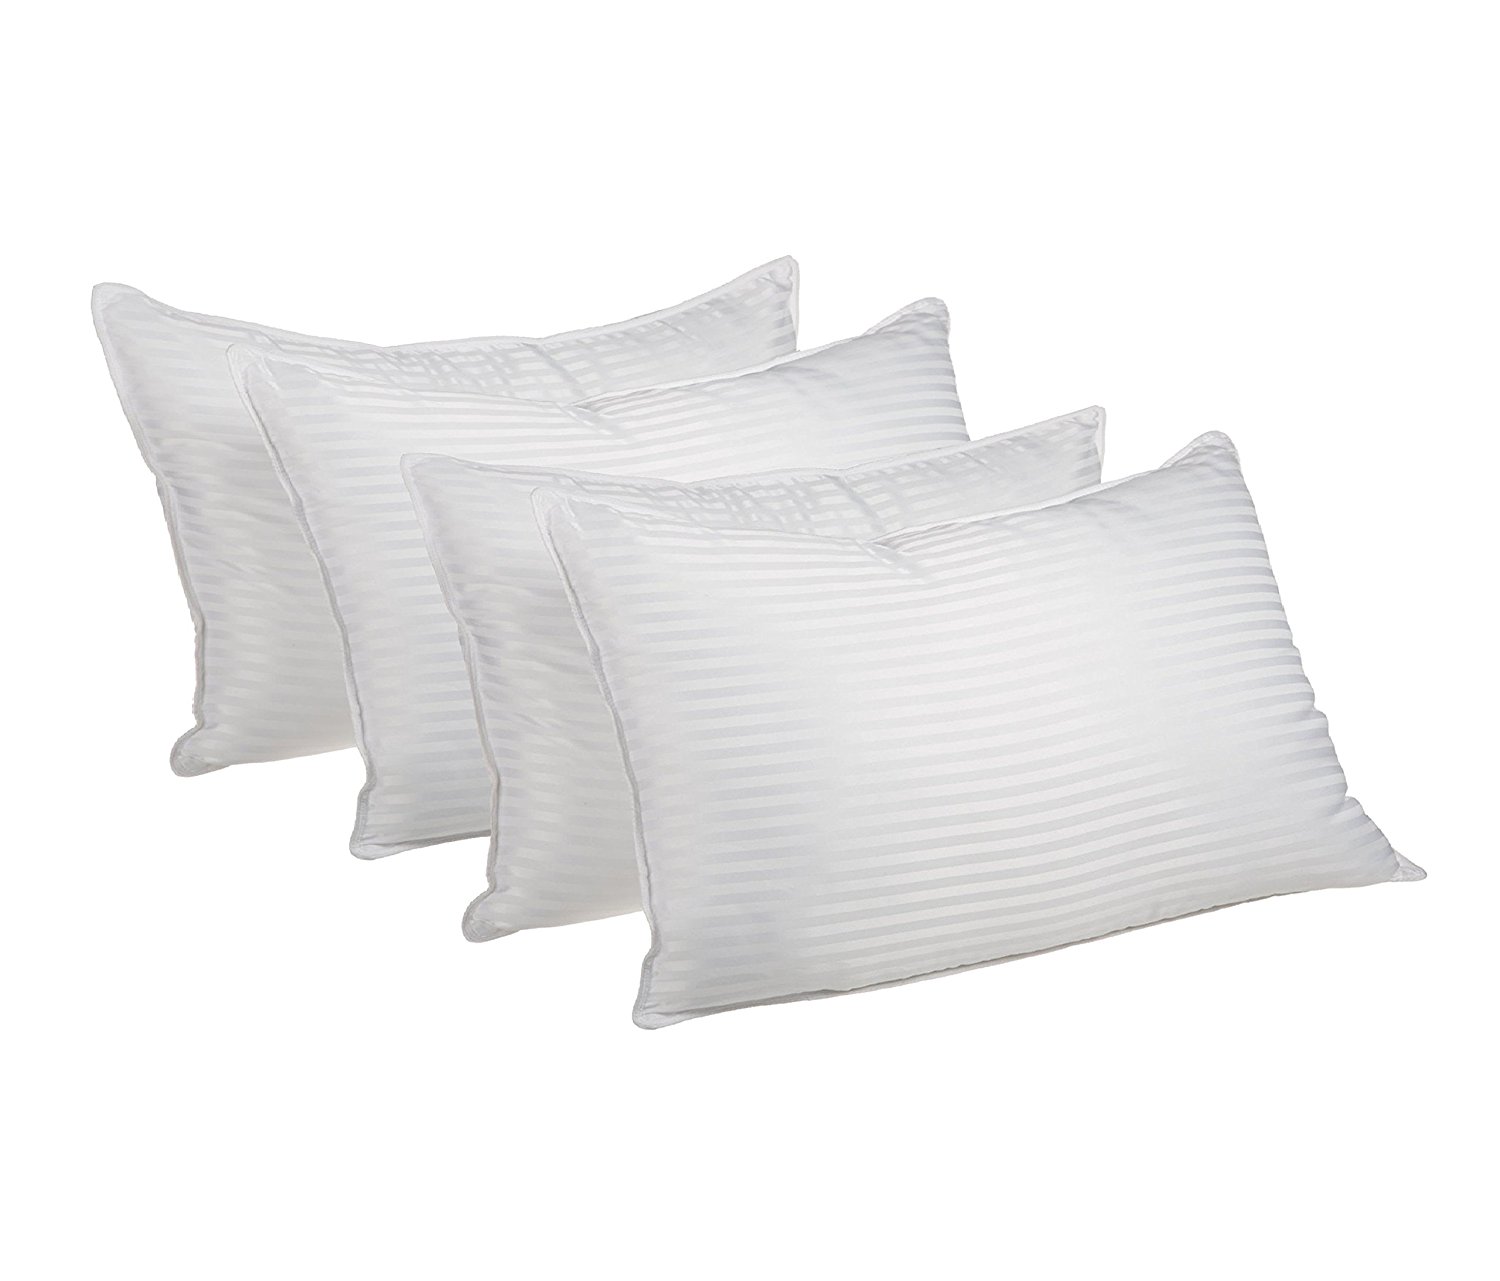 Superior White Down Alternative Pillow 4-Pack – From $44.99!